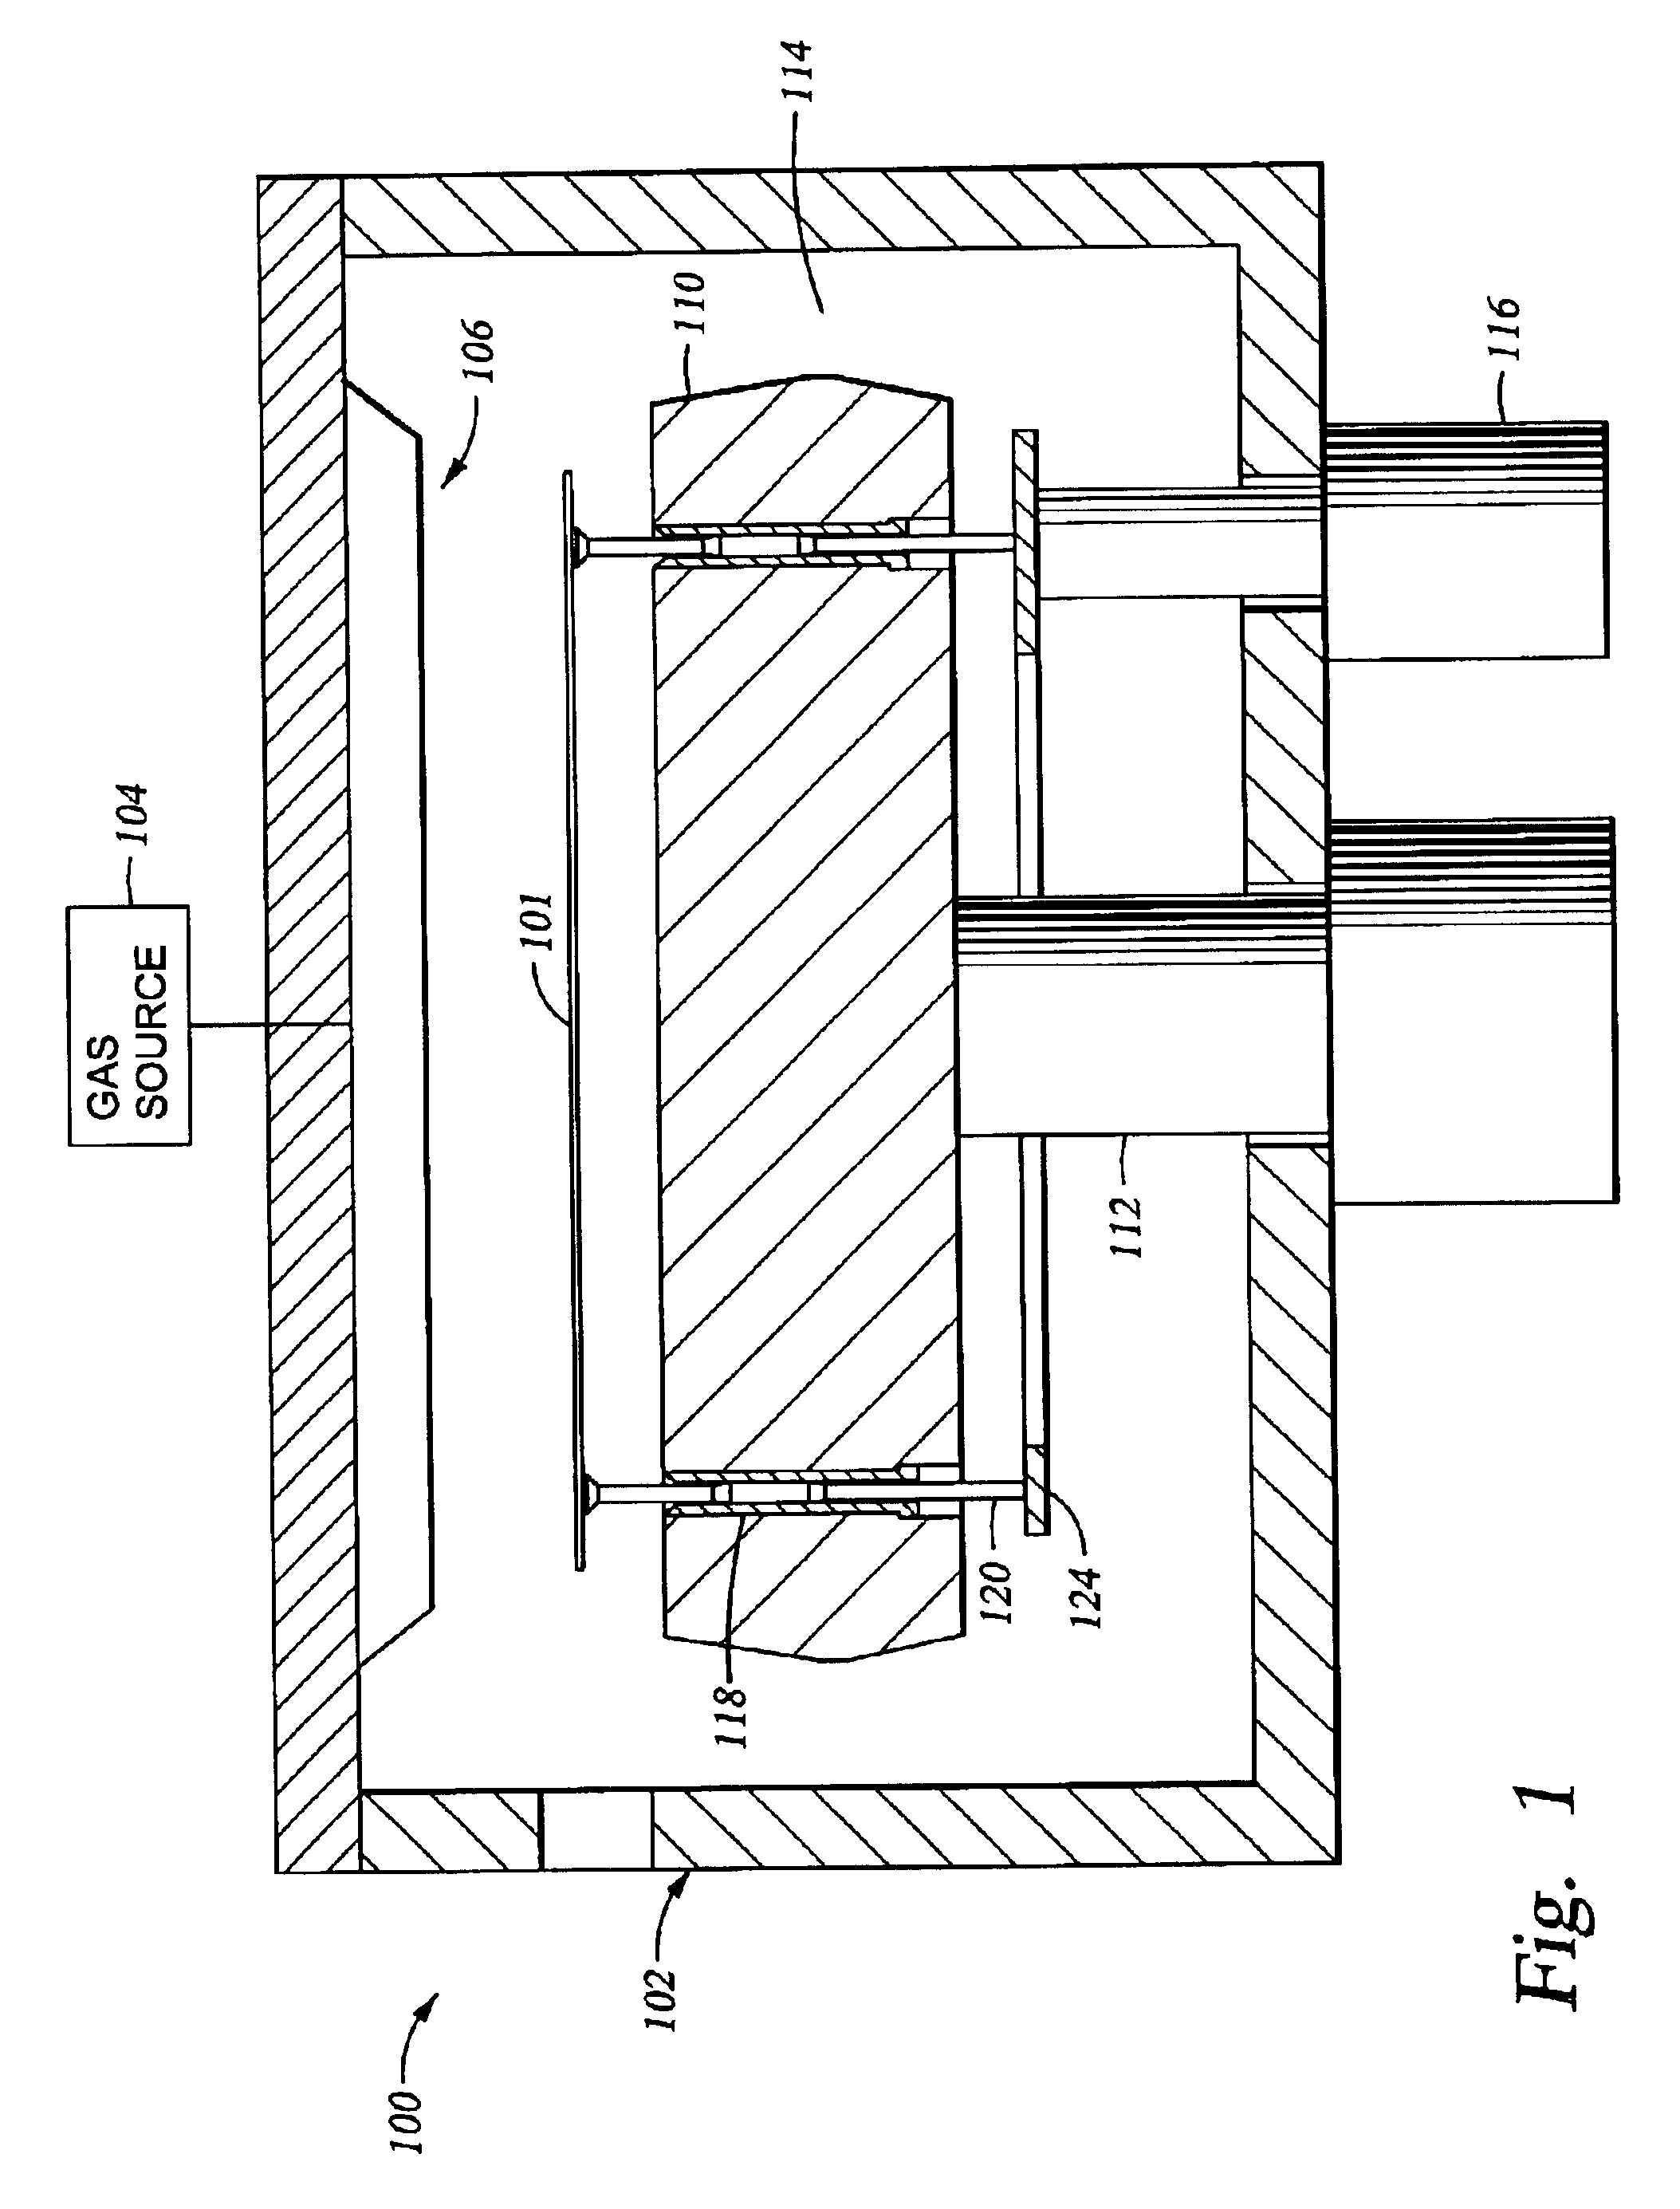 Reduced friction lift pin